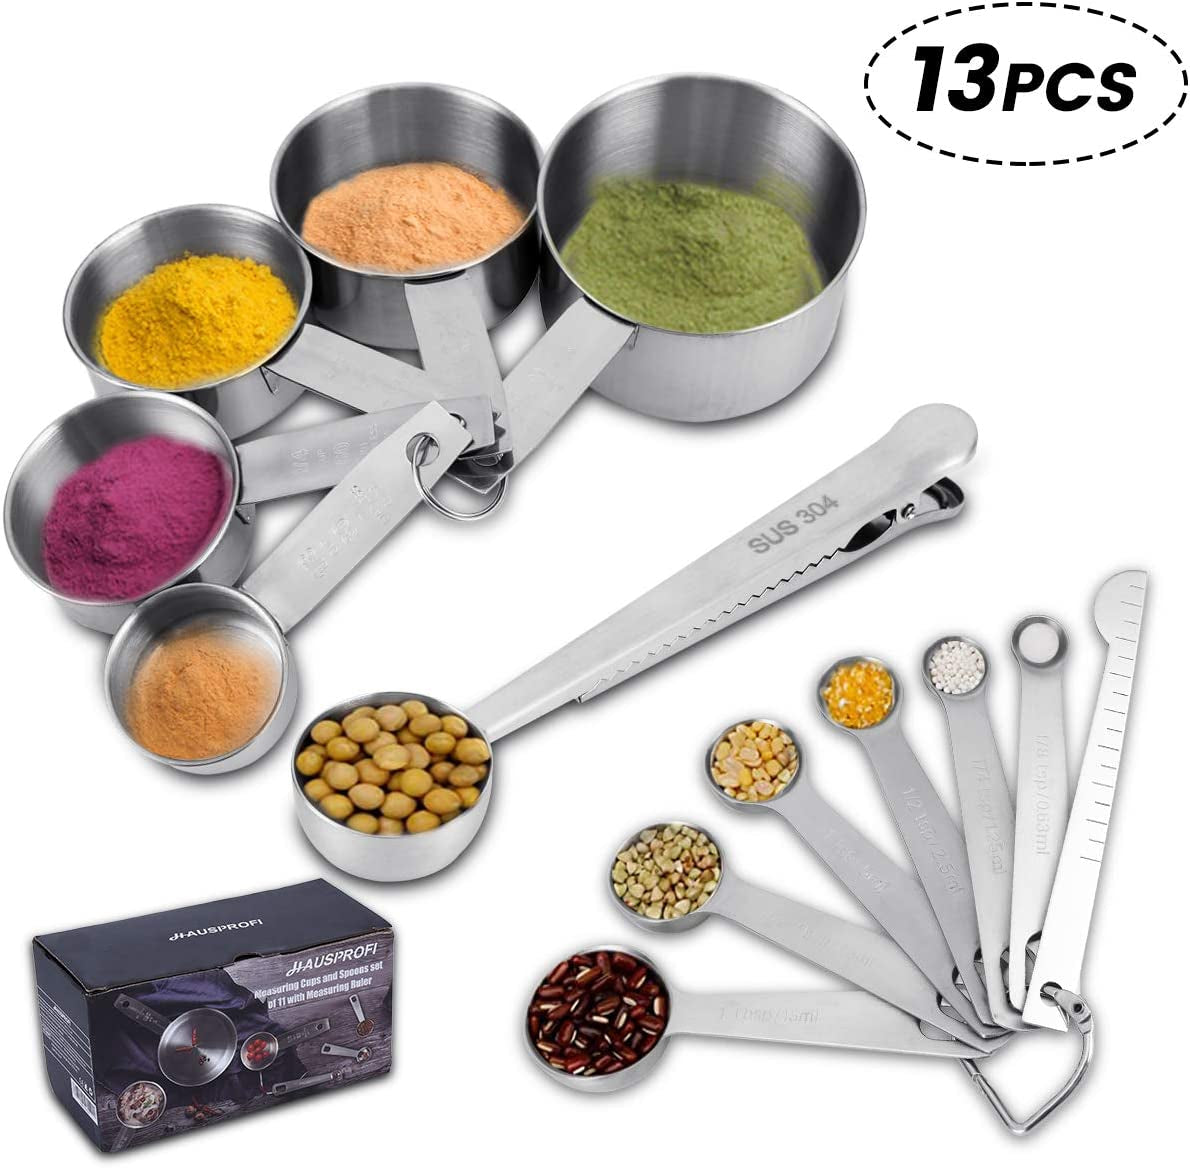 Measuring Cups and Spoons Set, 13 Pieces Premium Stainless Steel Measuring Spoons with Ruler Scoop/Clip for Baking, Liquid and Solid